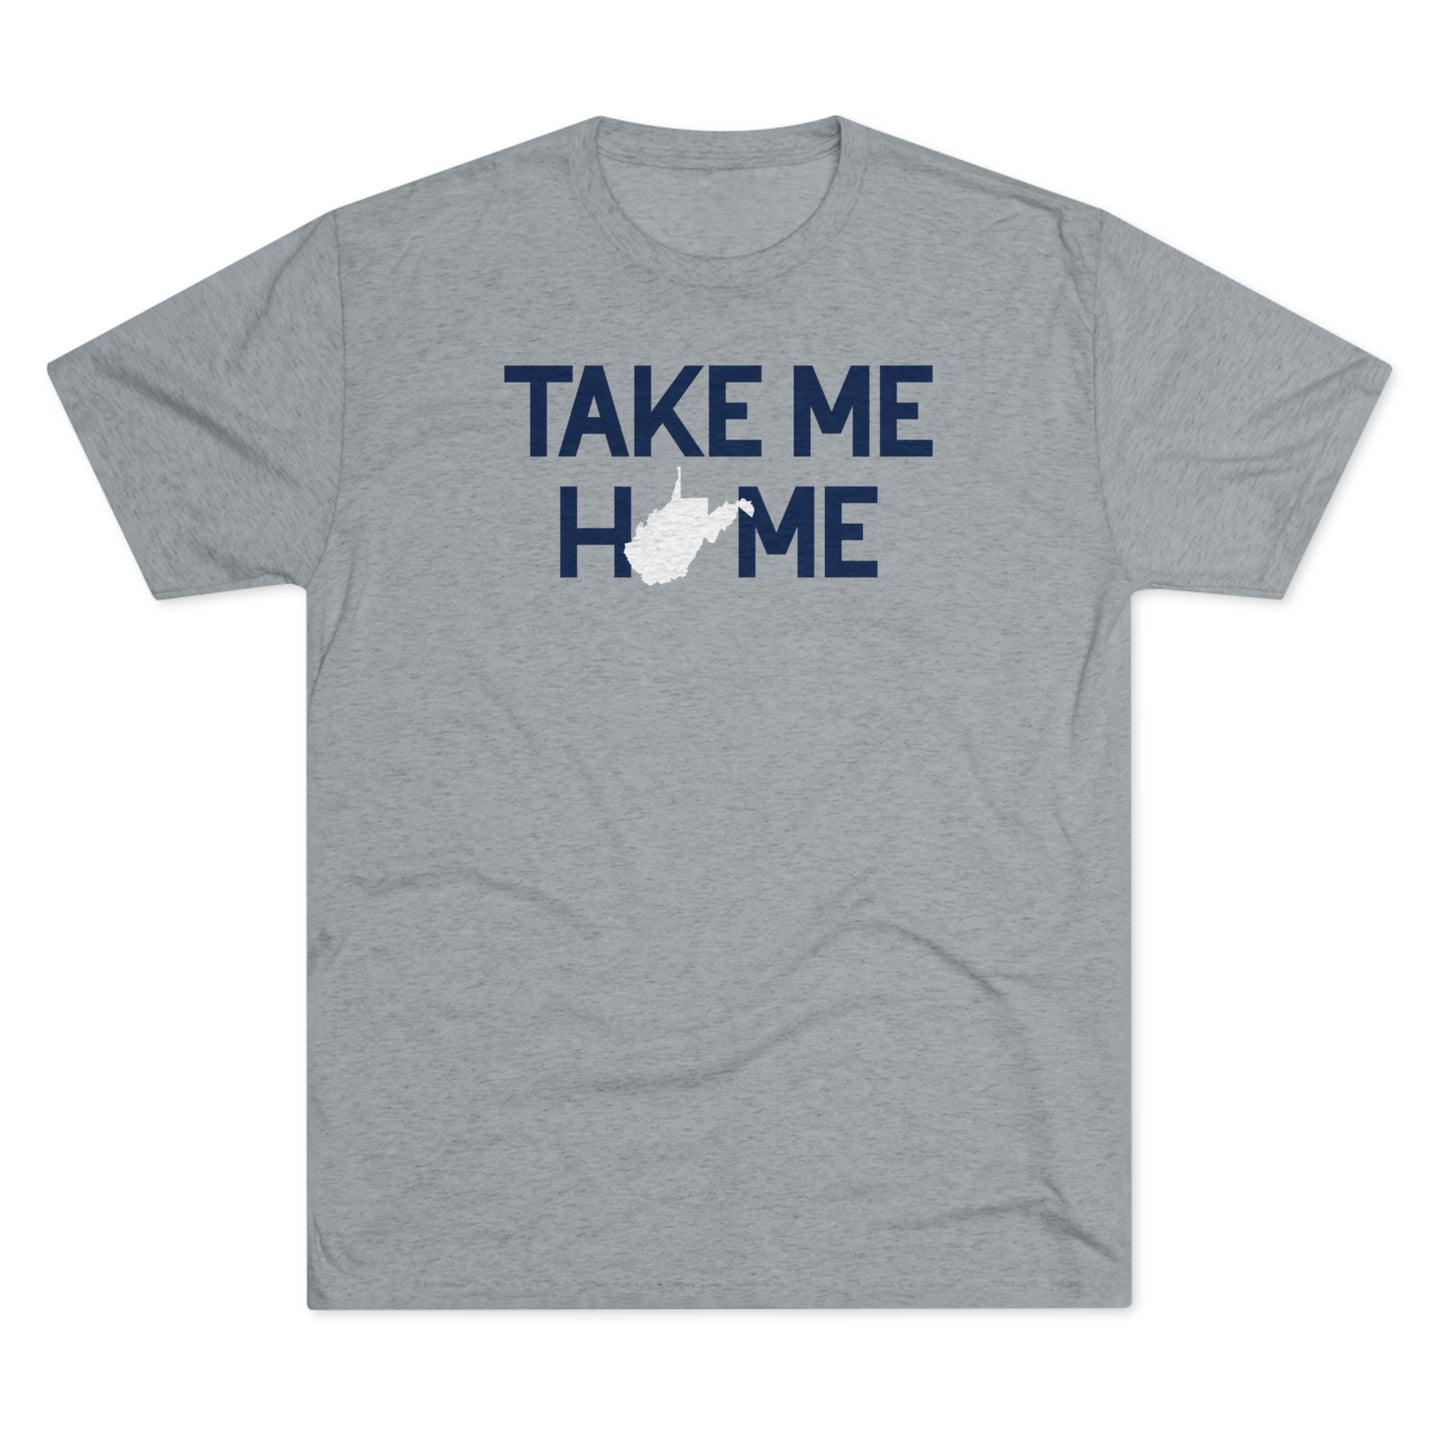 TAKE ME HOME_WV STATE SHAPE SUBSTITUTION-Unisex Tri-Blend Crew Tee